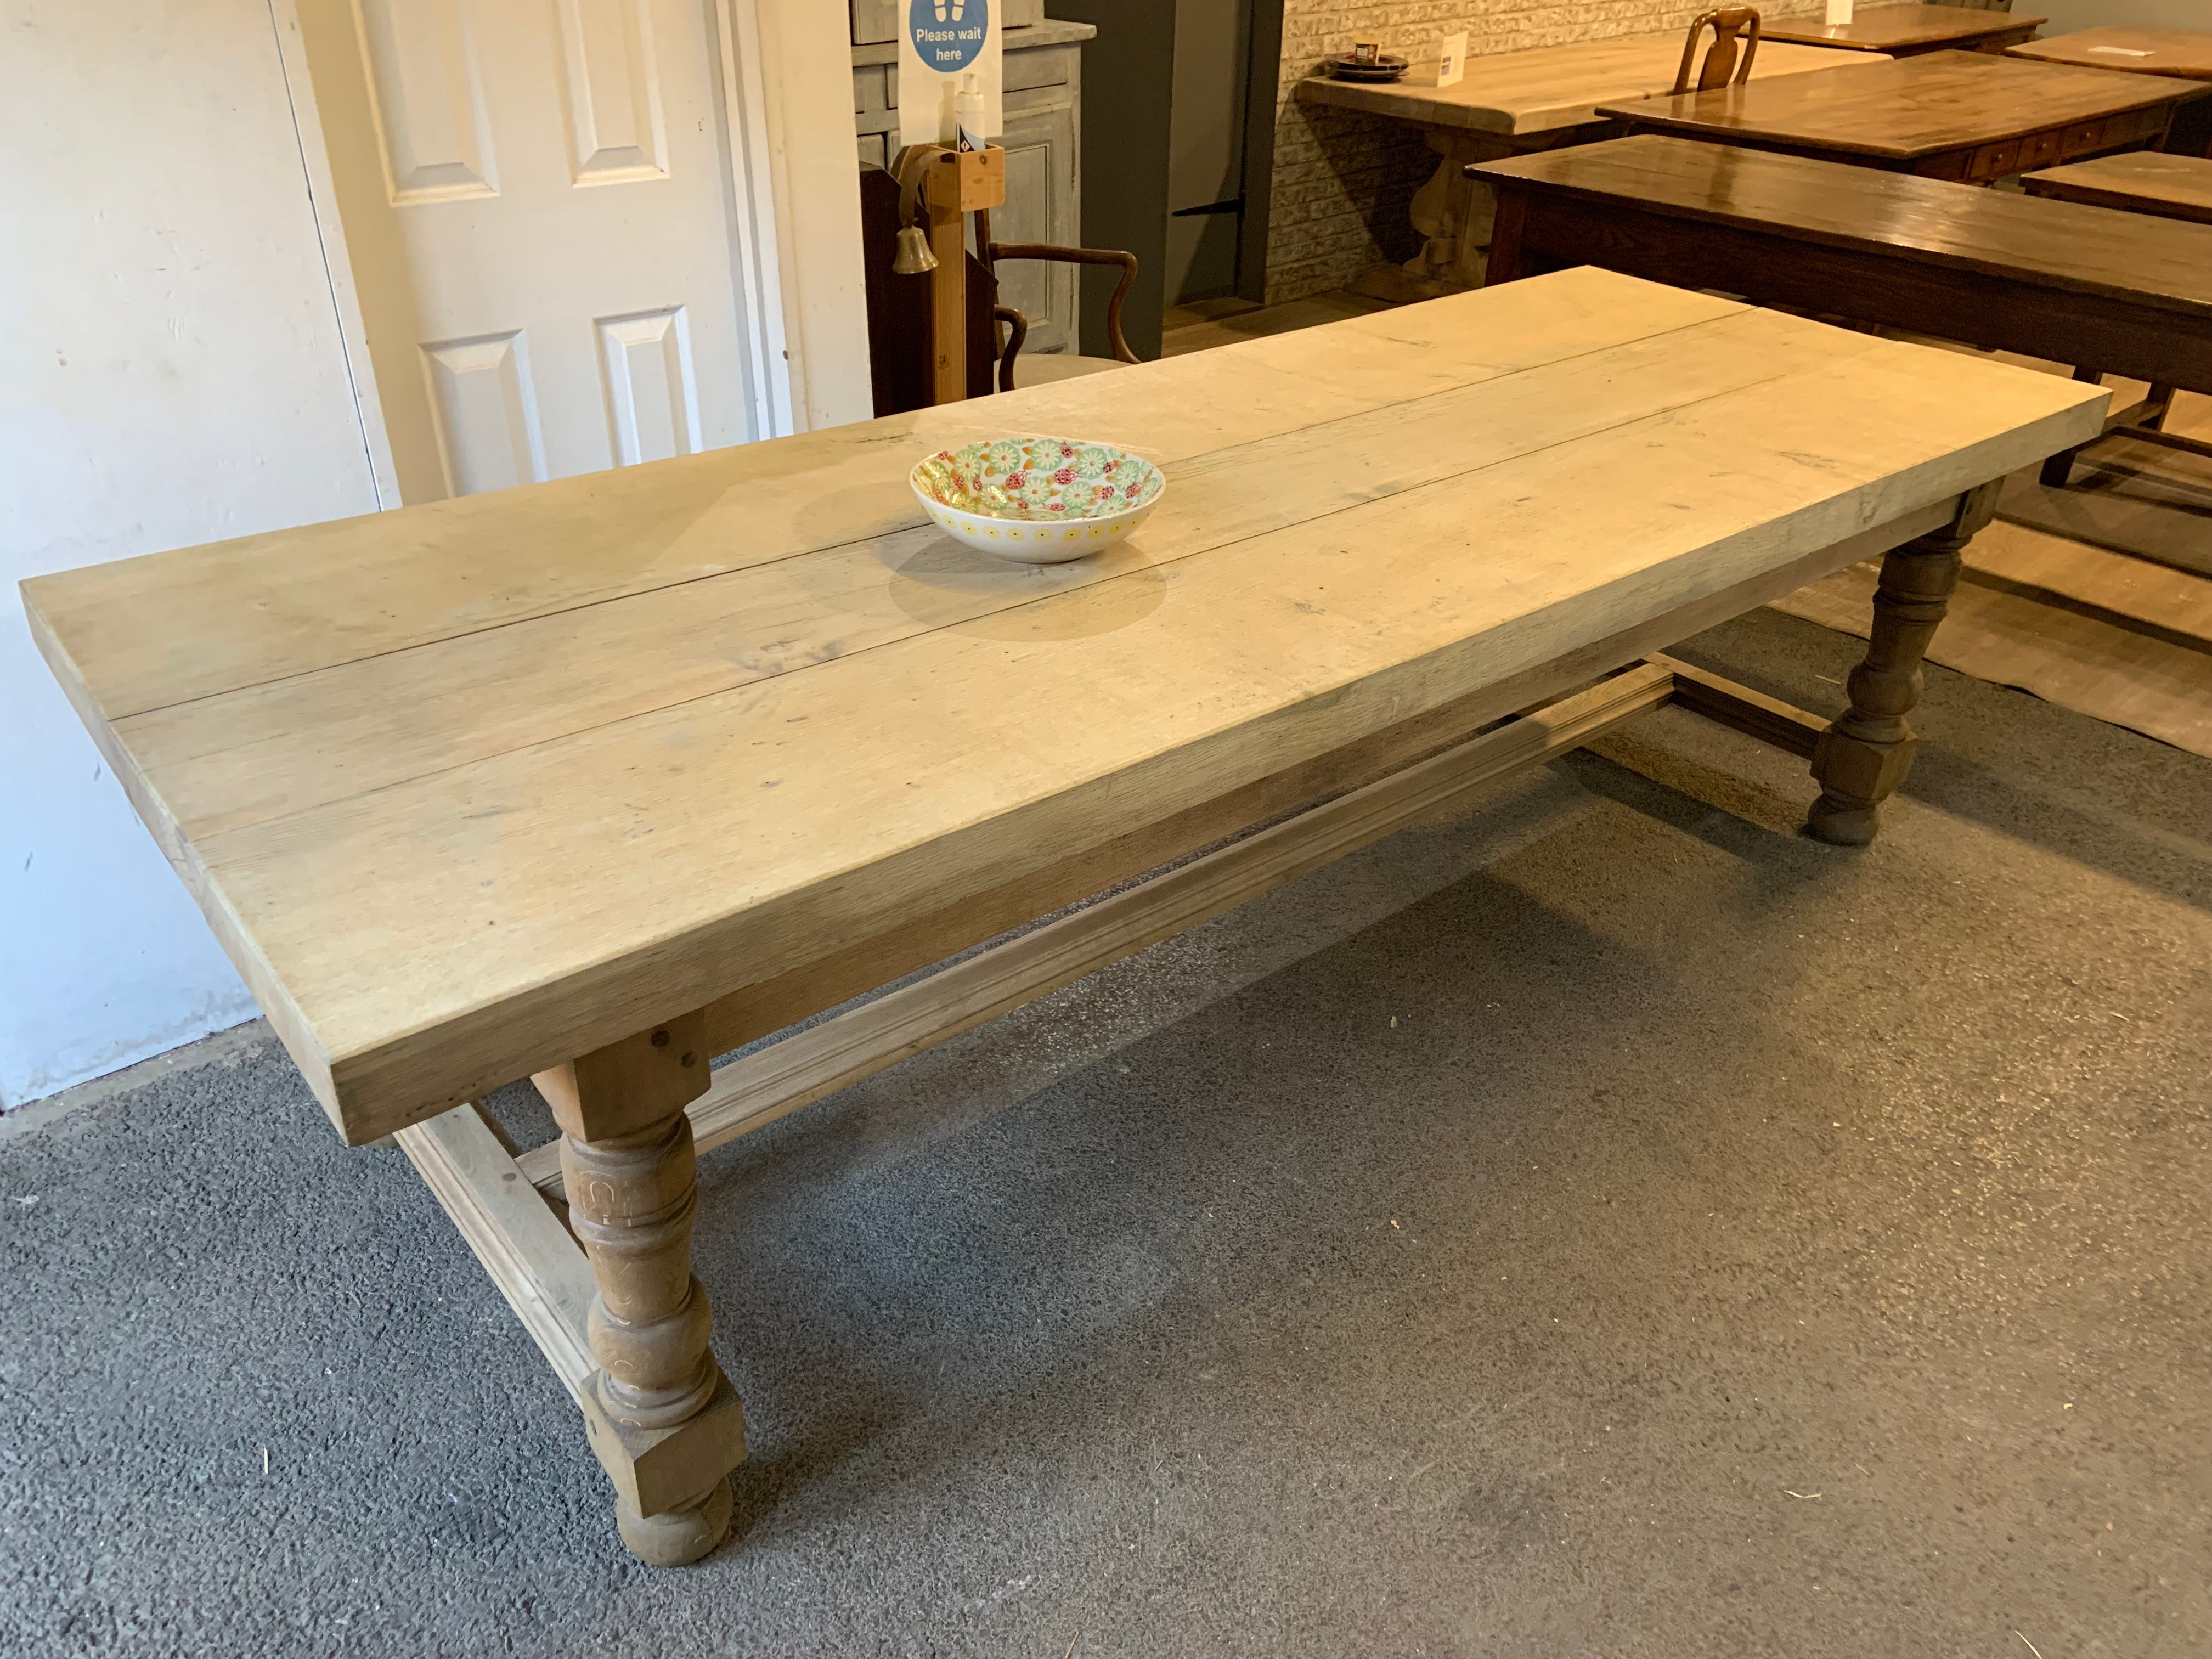 Antique pale oak farmhouse table with thick top and lovely round legs. The base is joined with a centre stretcher and is very sturdy. The top of this does come off so this makes it easier for transportation. The knee height is very good at the